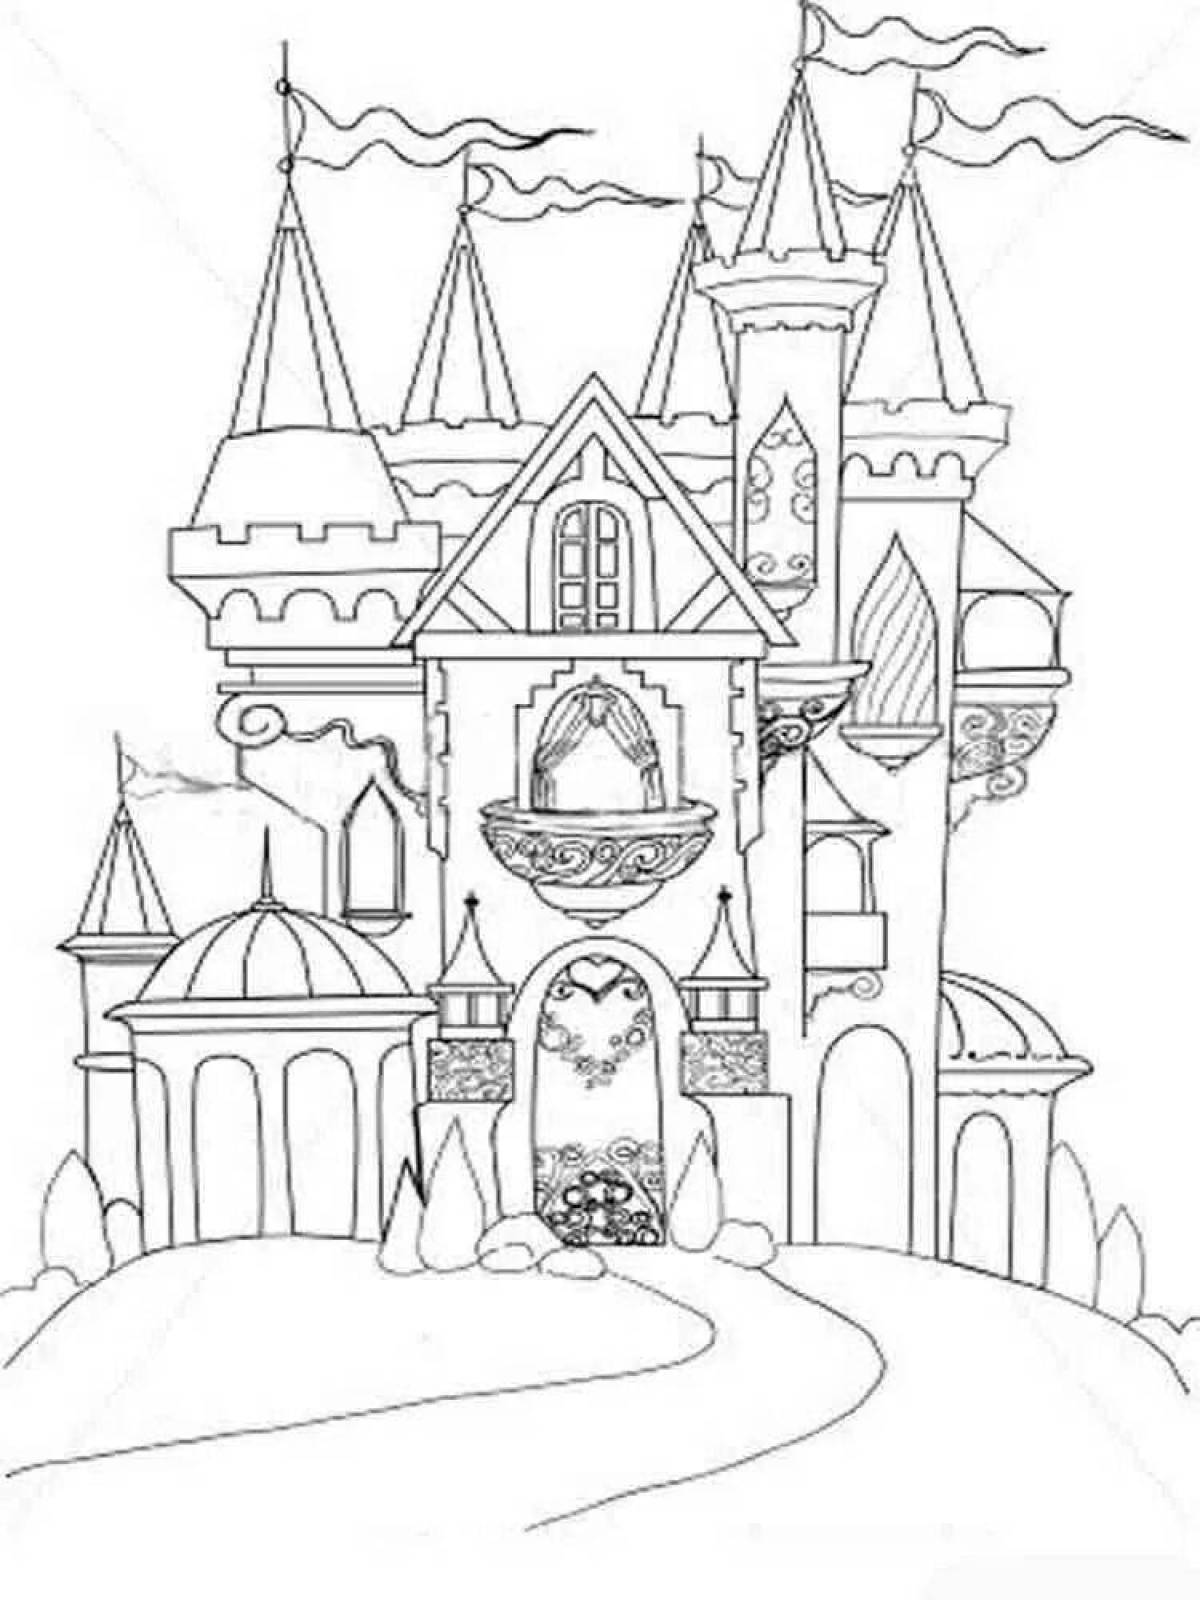 Exquisite fairy palace coloring book